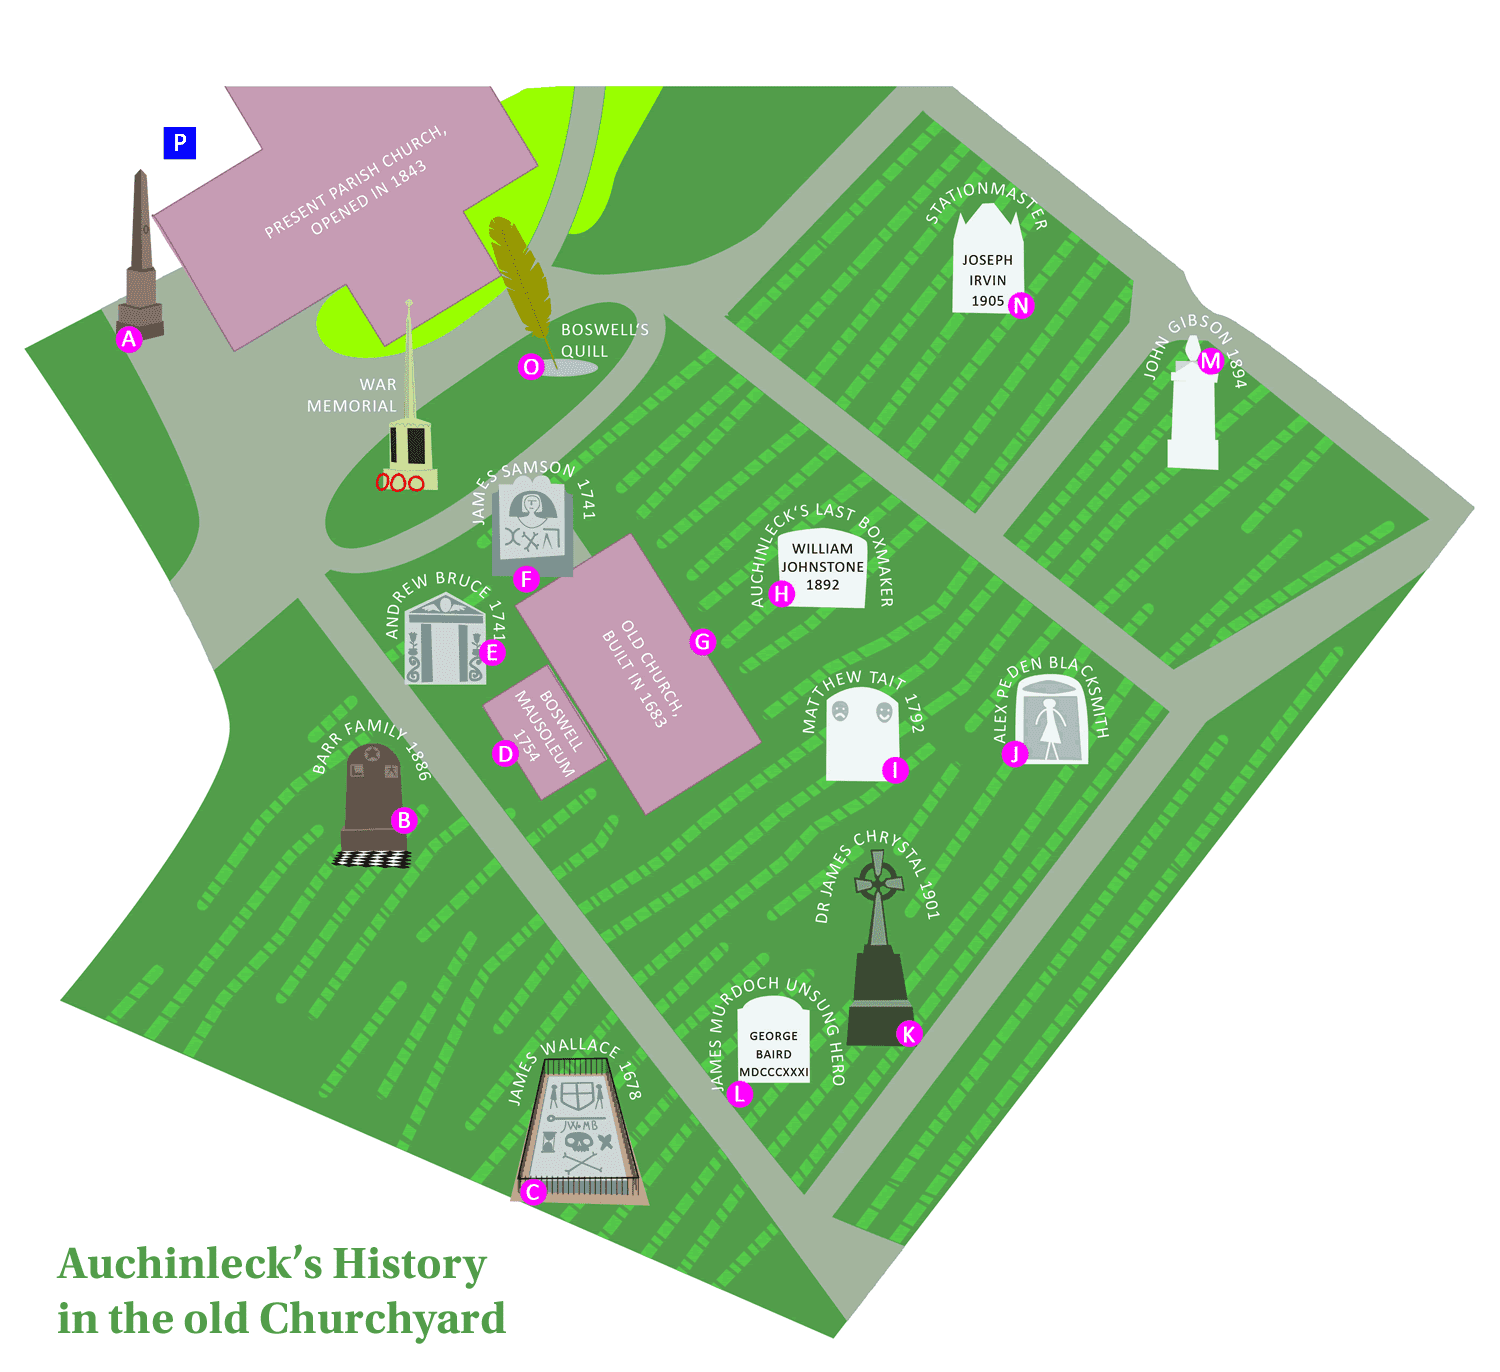 Auchinleck's History in the old Churchyard